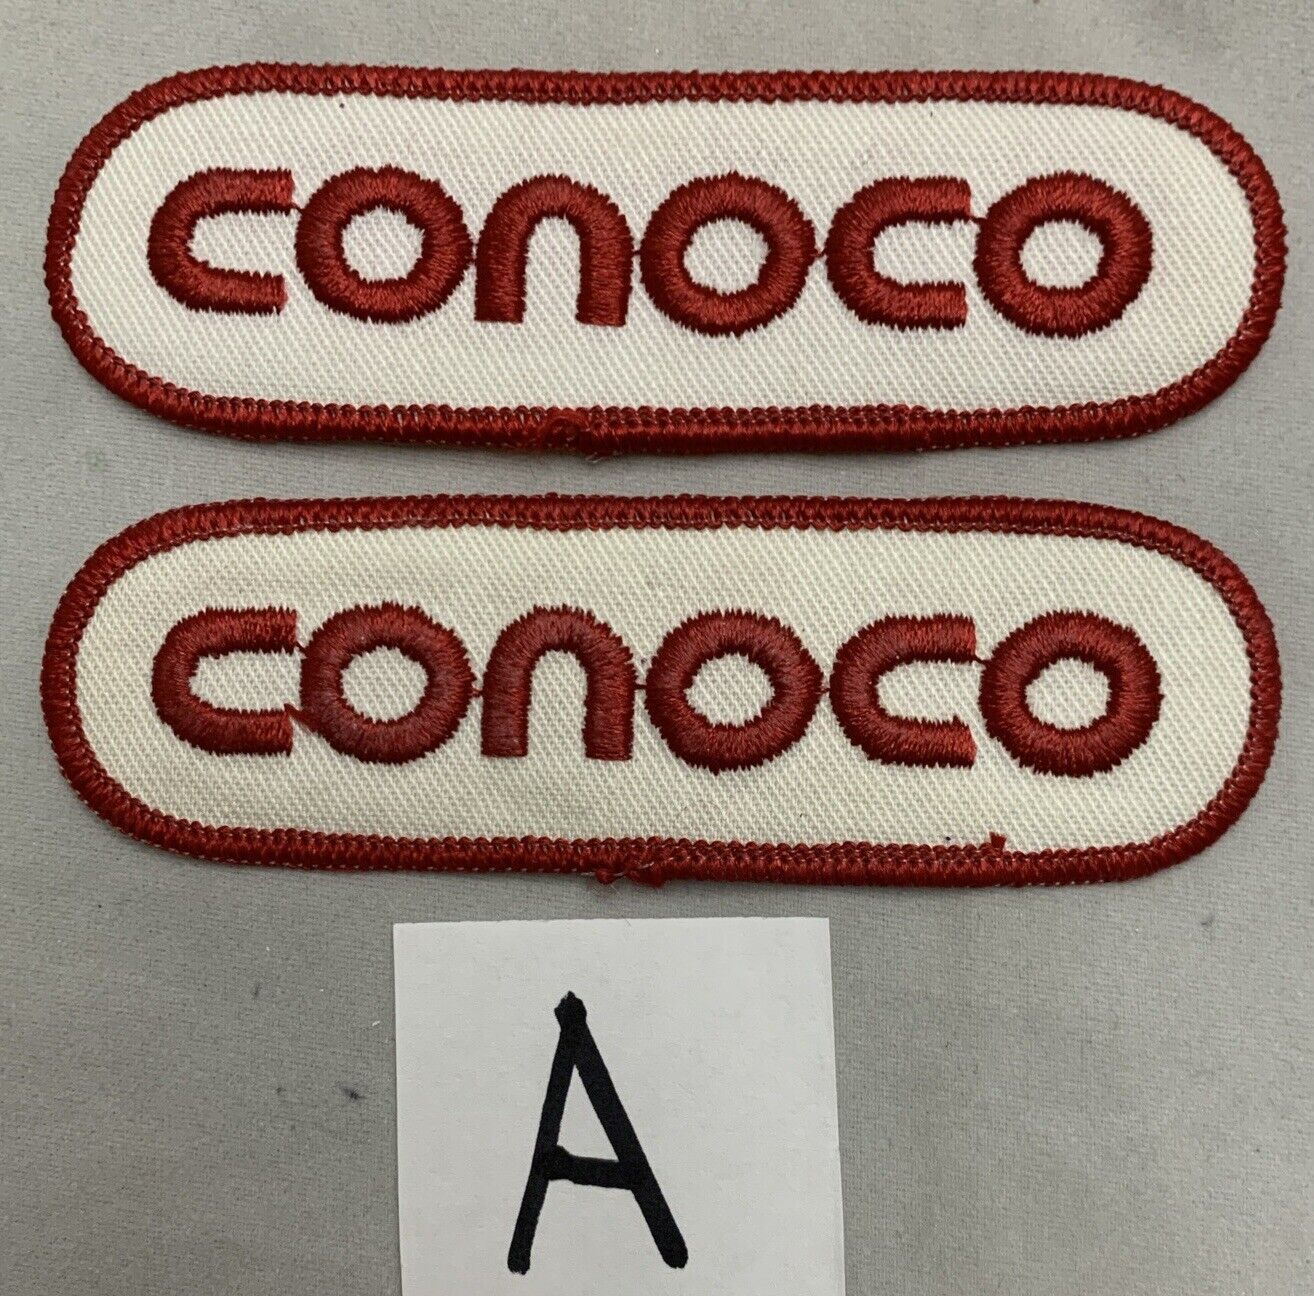 Set of 2 Vintage Conoco Sew on Patch Badge 4”x 1.25”  Uniform Oil  Advertising